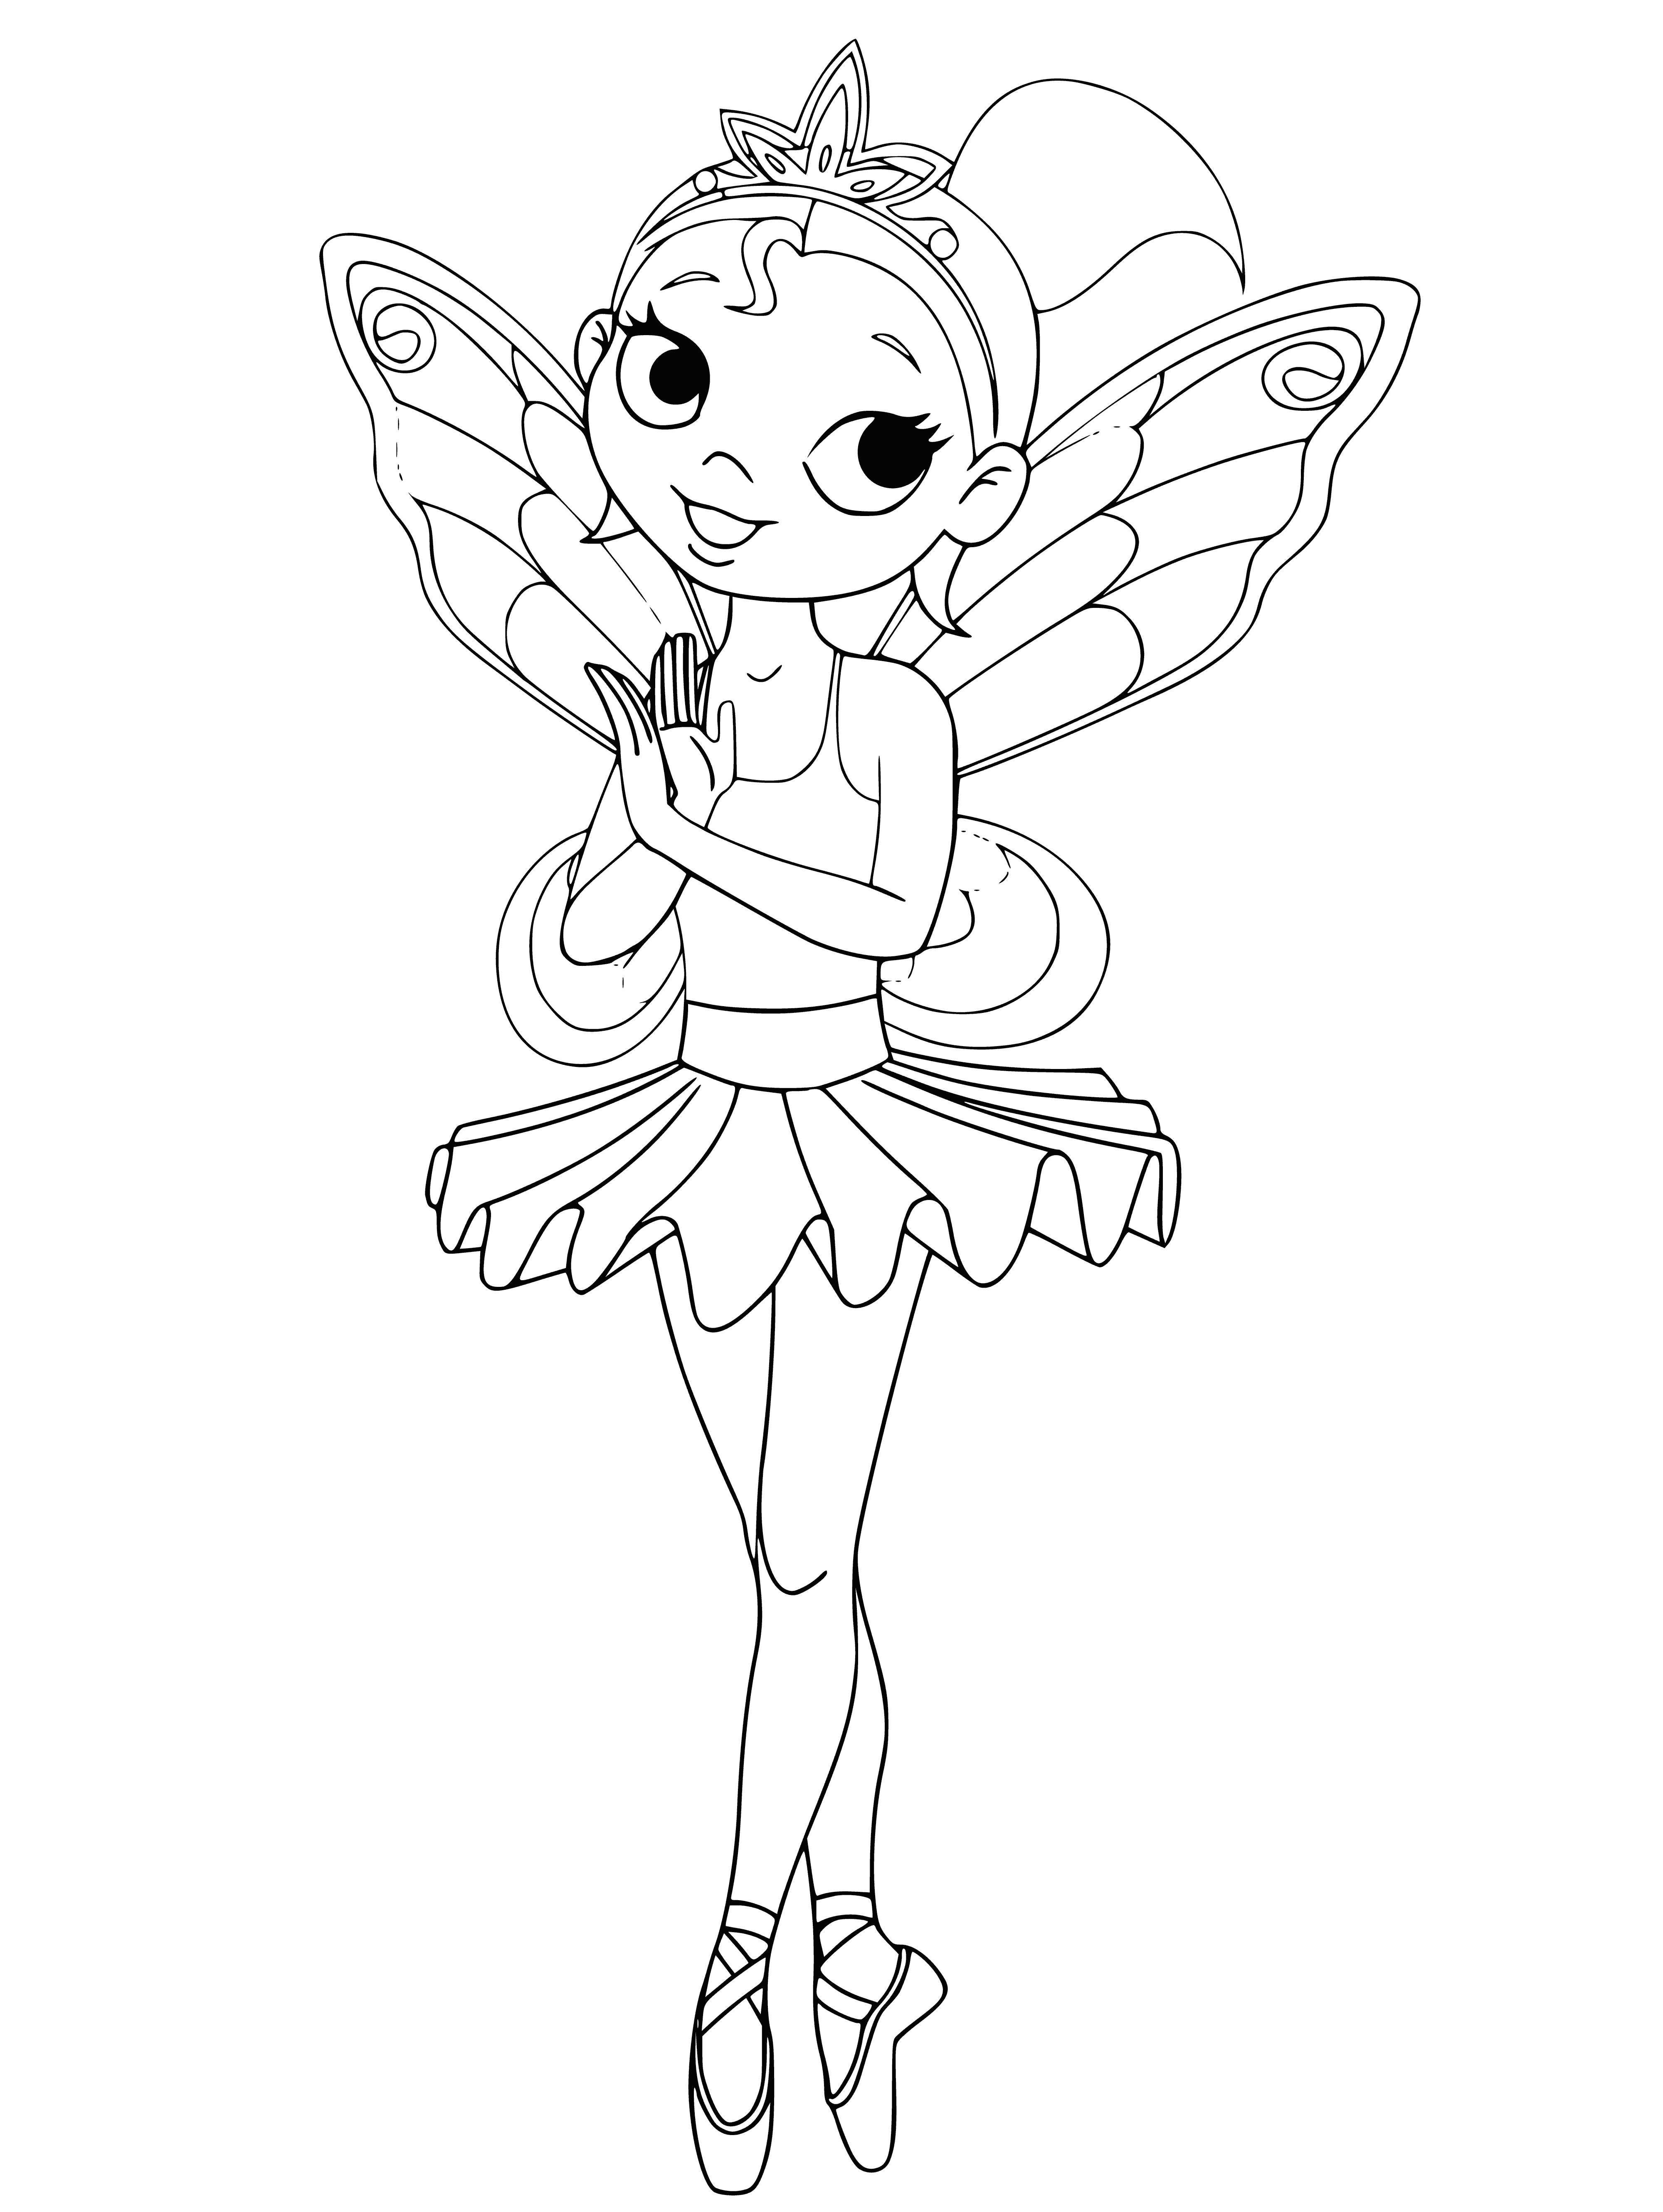 coloring page: Girl in coloring page dances gracefully in tutu, arms outstretched, head tilted back - happy and graceful. #dancing